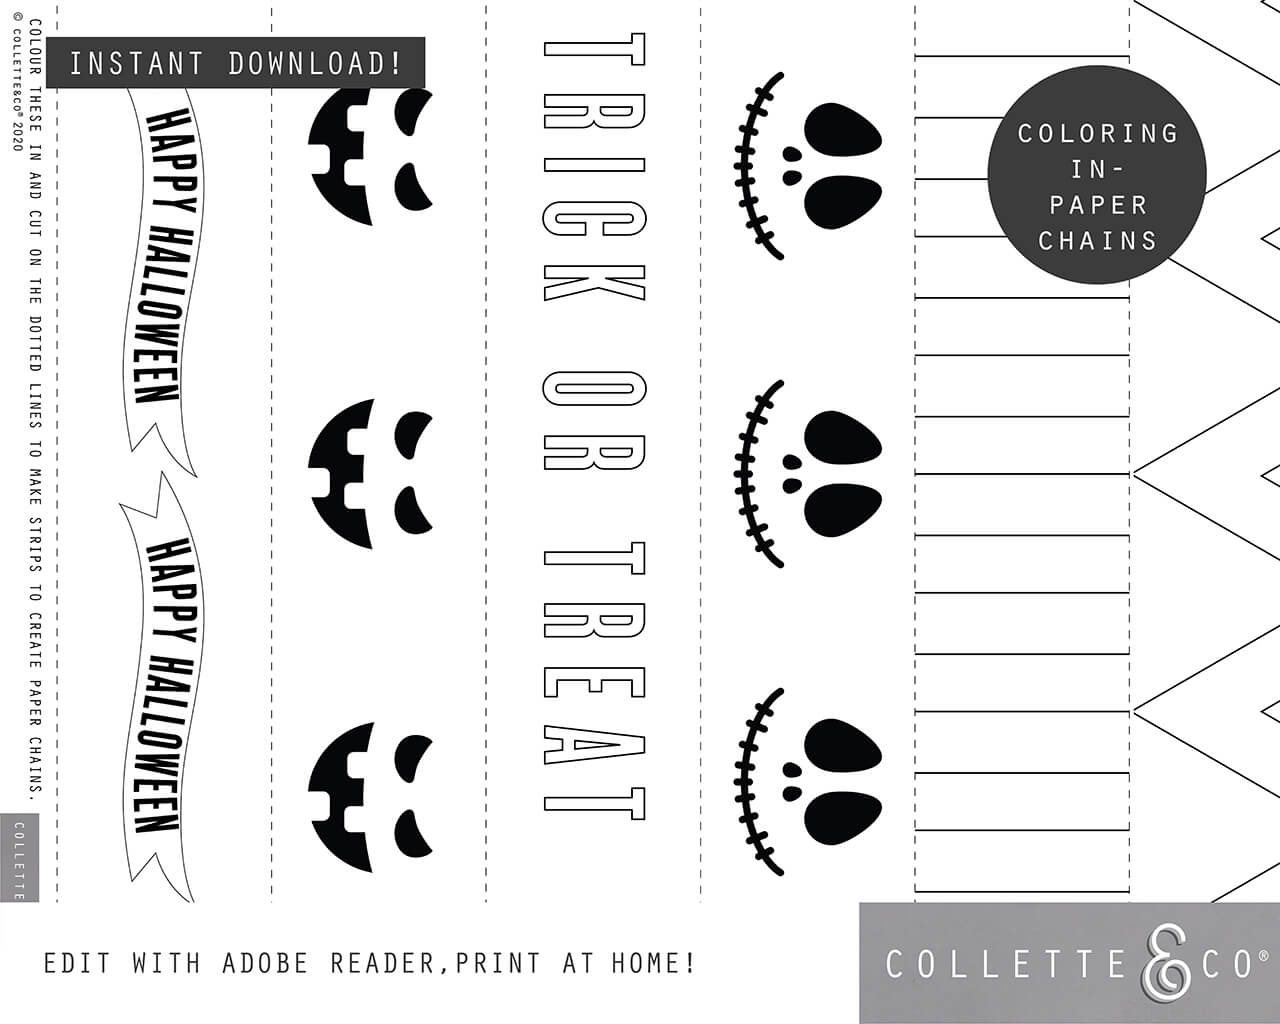 Halloween paper chains printable collette co